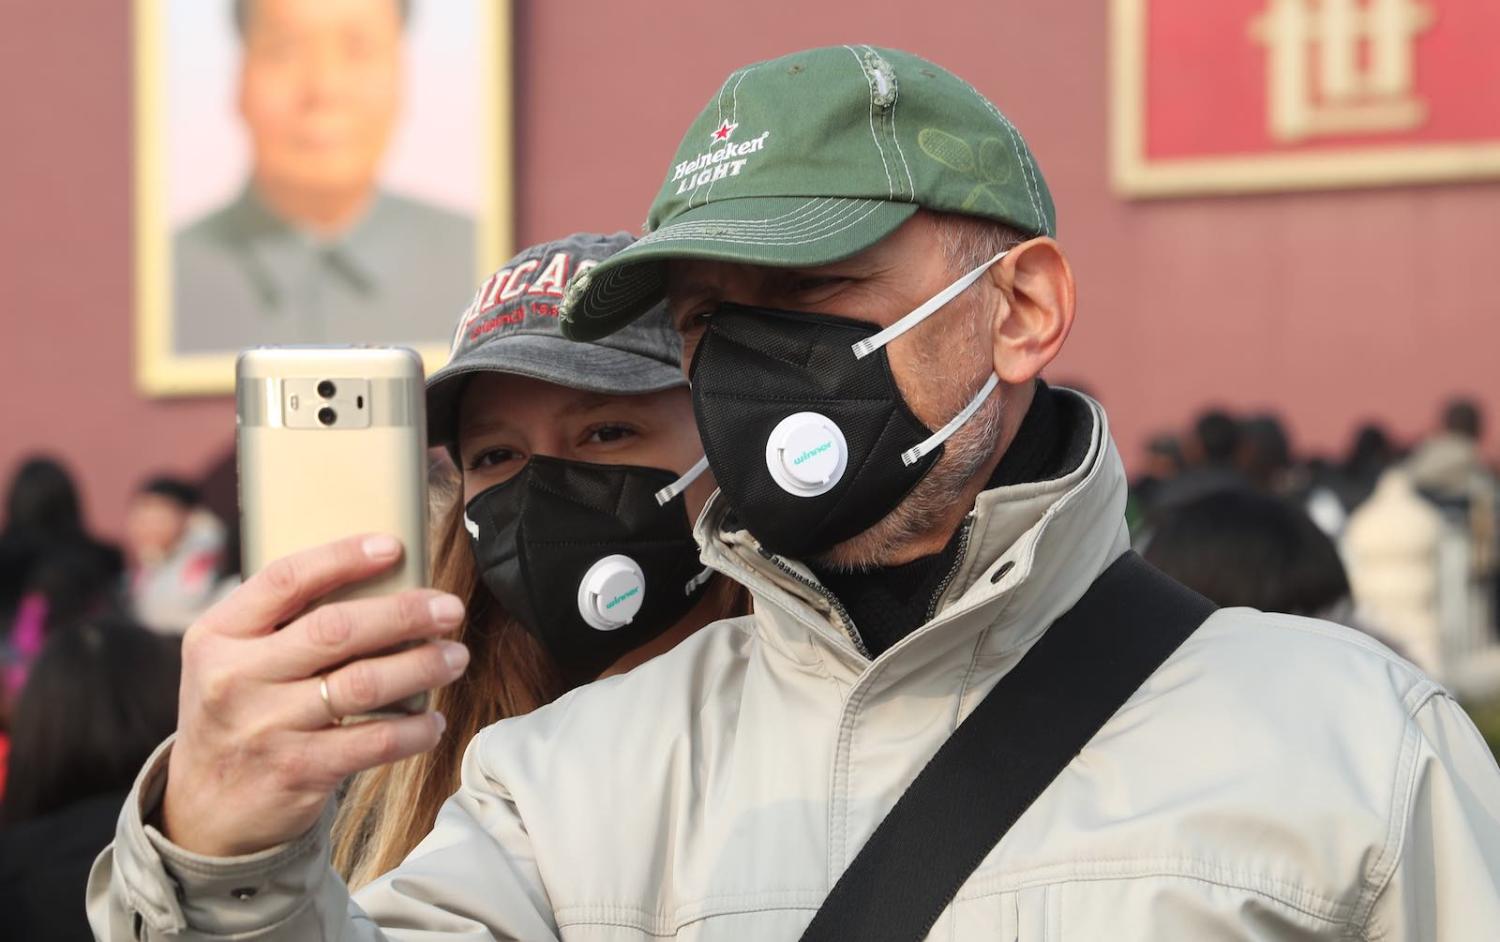 Tourists take a selfie in smog and fog this month at Tiananmen Square, Beijing (Photo: VGC via Getty)